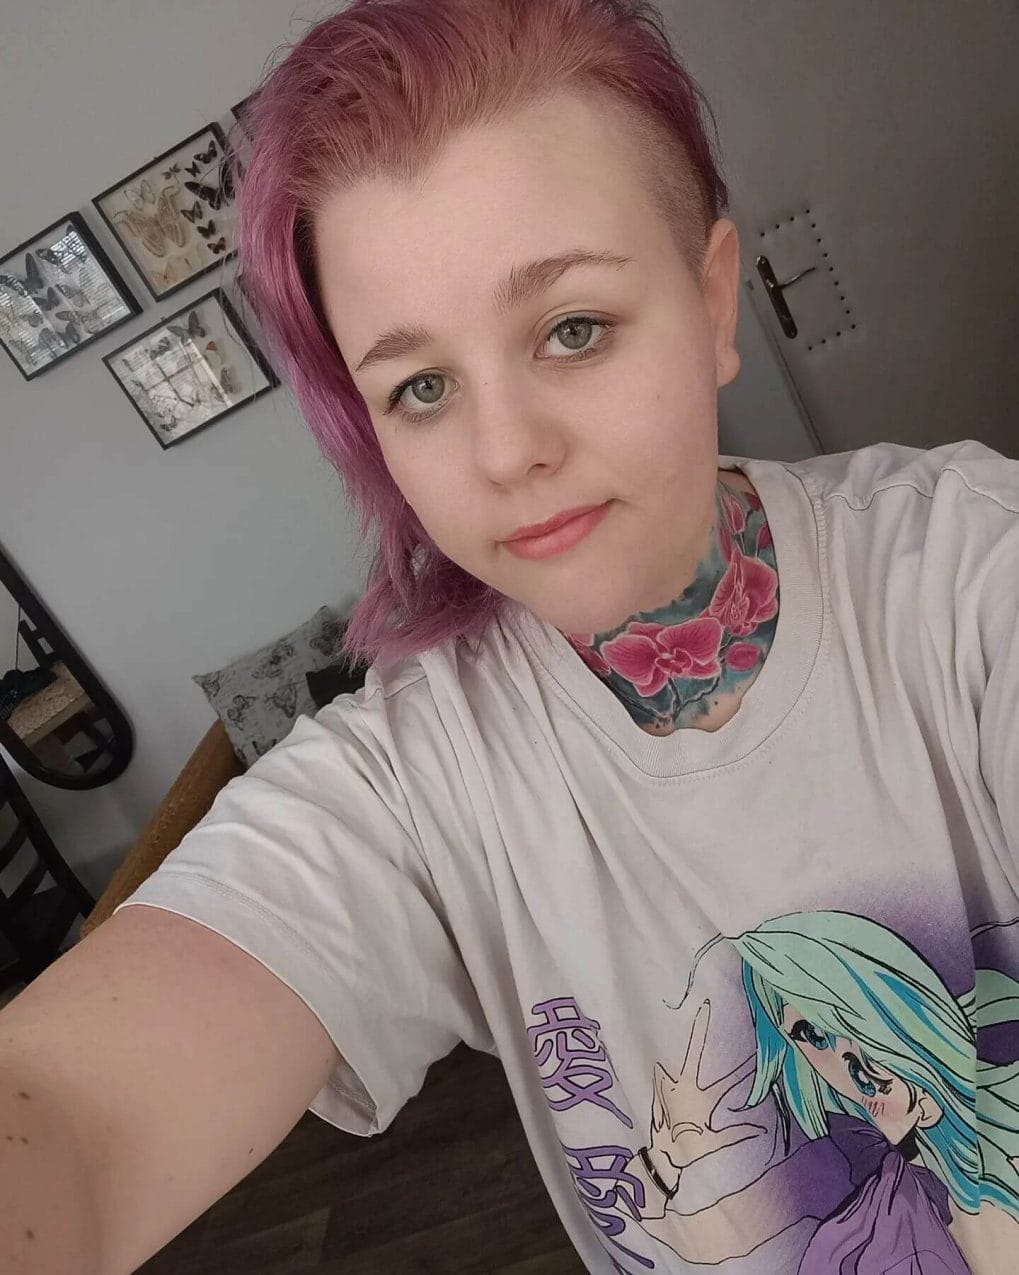 Asymmetrical haircut with bright purple undercut and long side